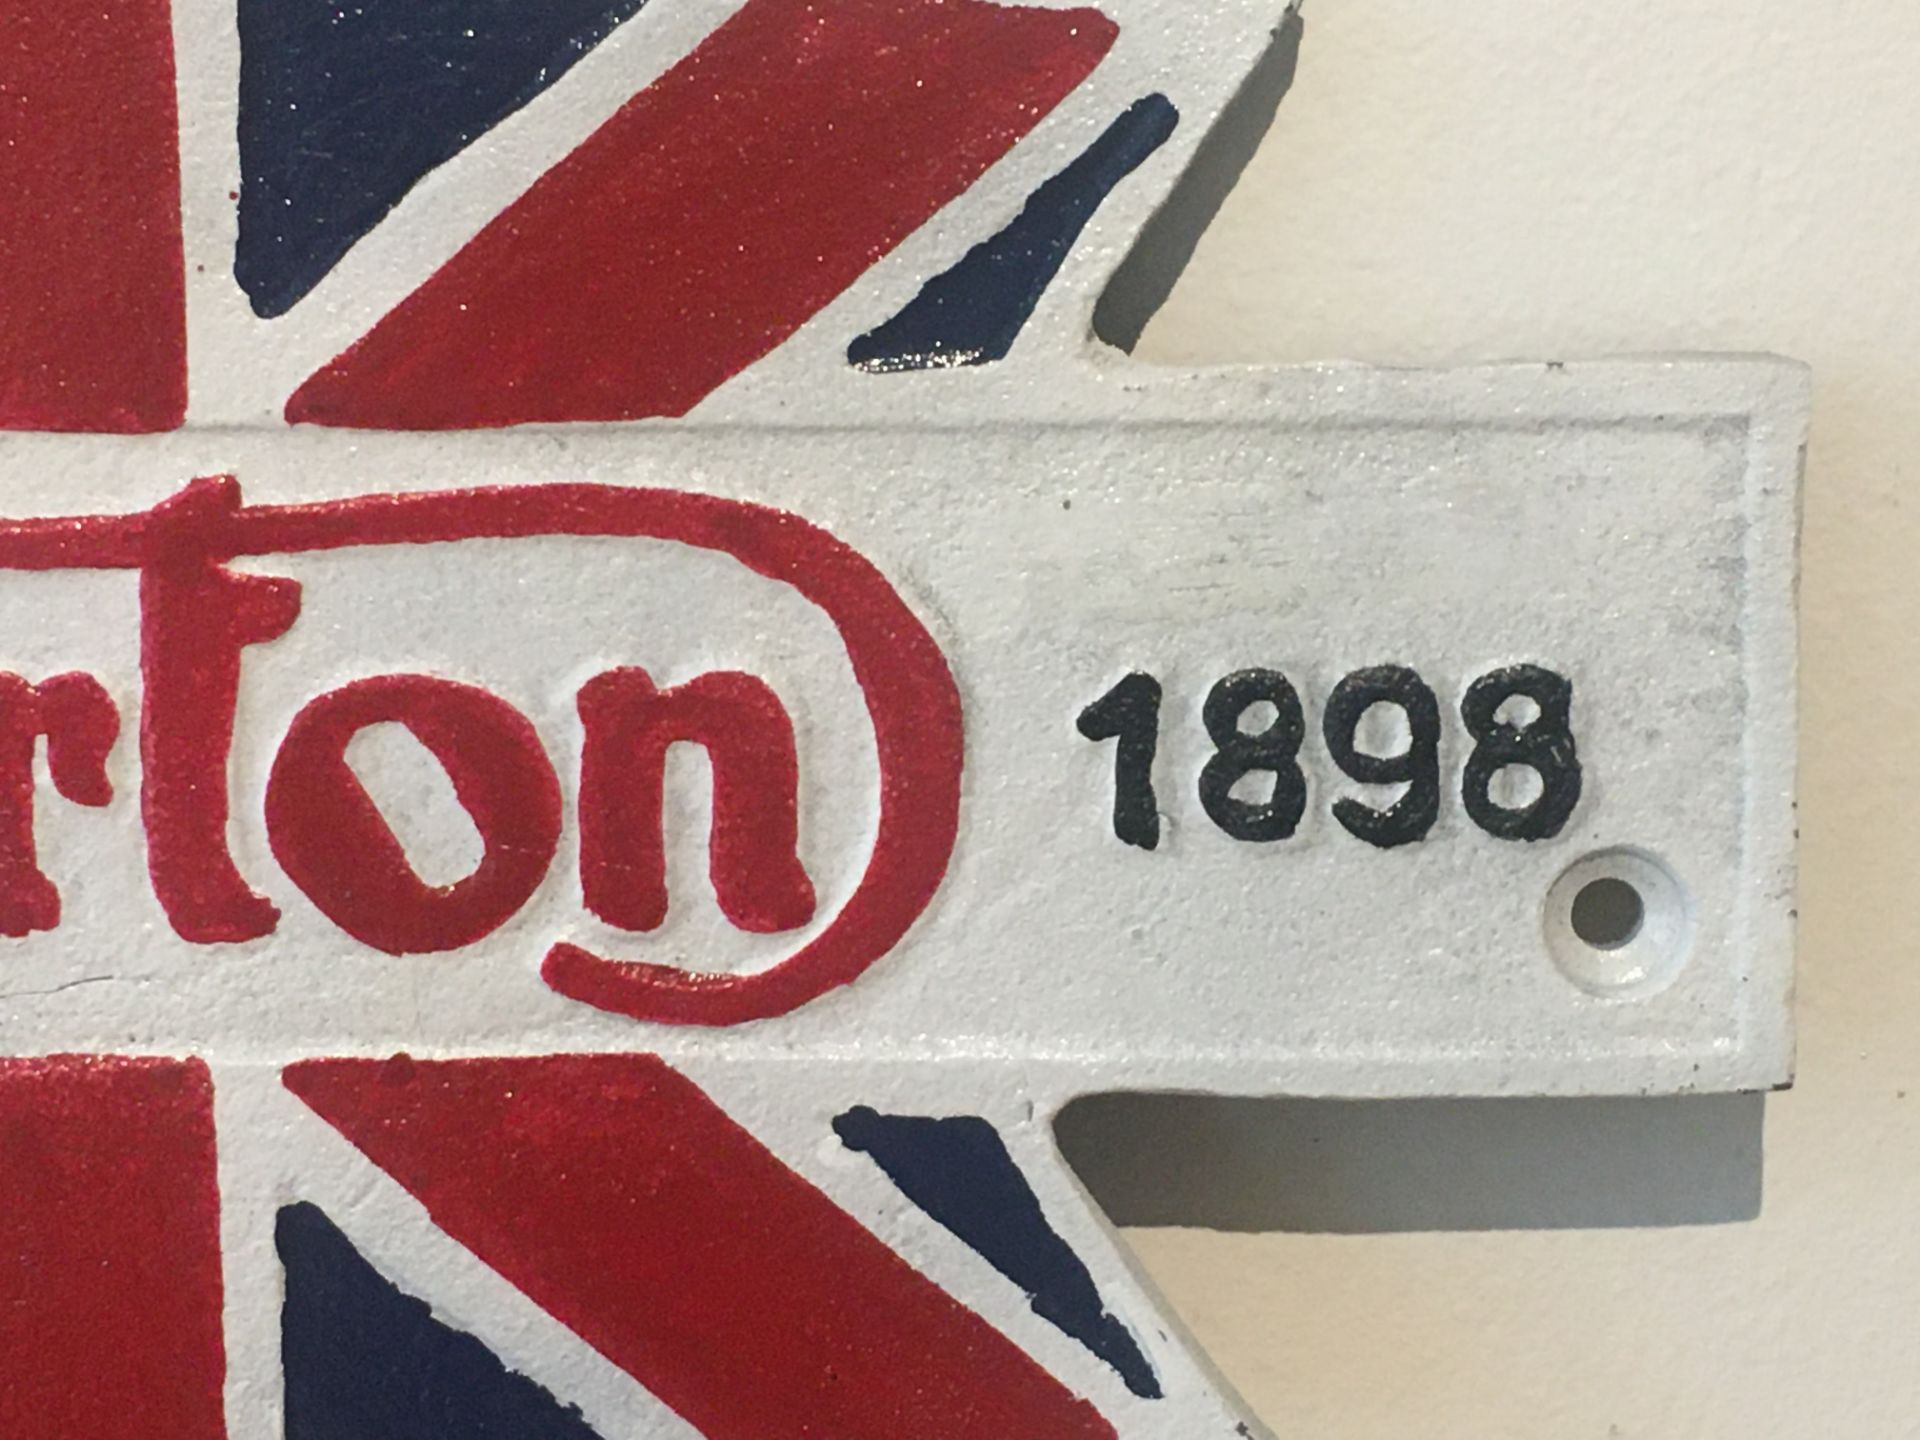 Norton Motorcycles 1898 Cast Iron Sign - Image 4 of 5